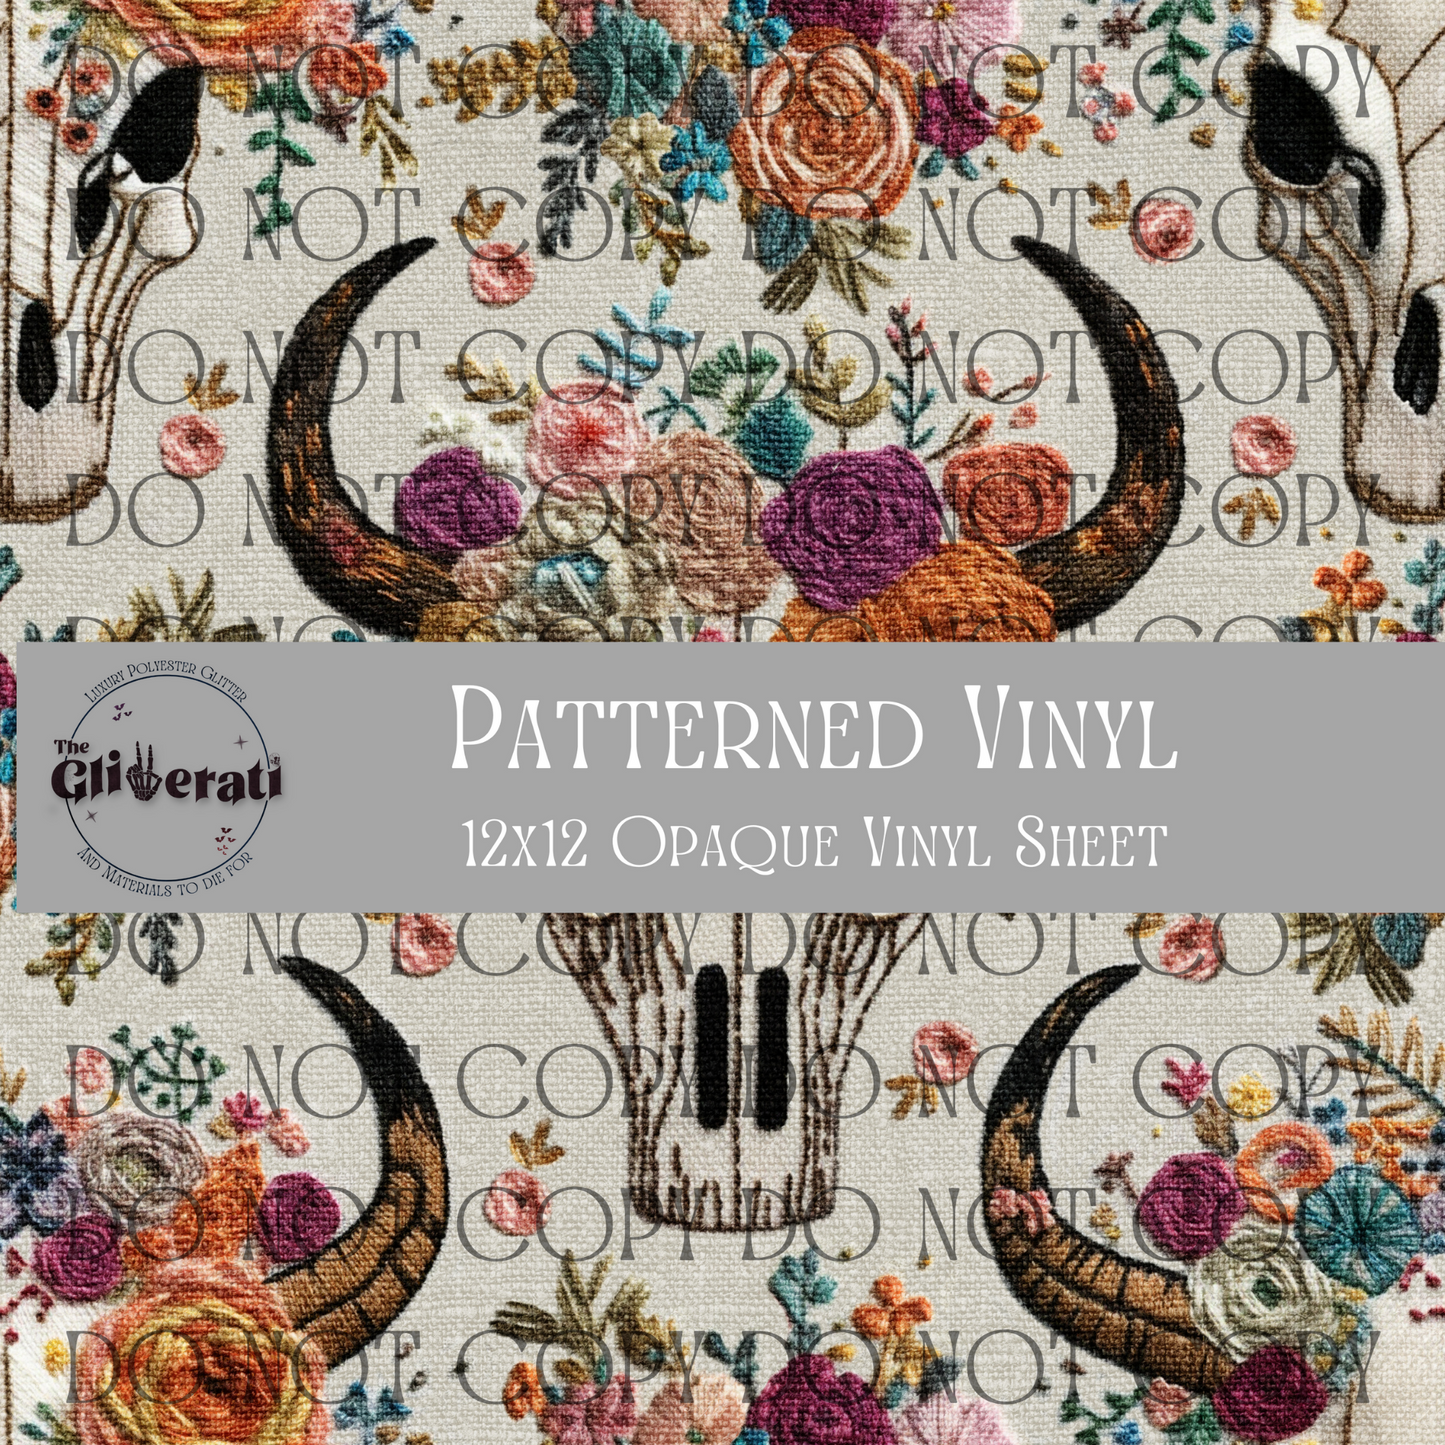 Western Floral Embroidery - Opaque Vinyl Sheet